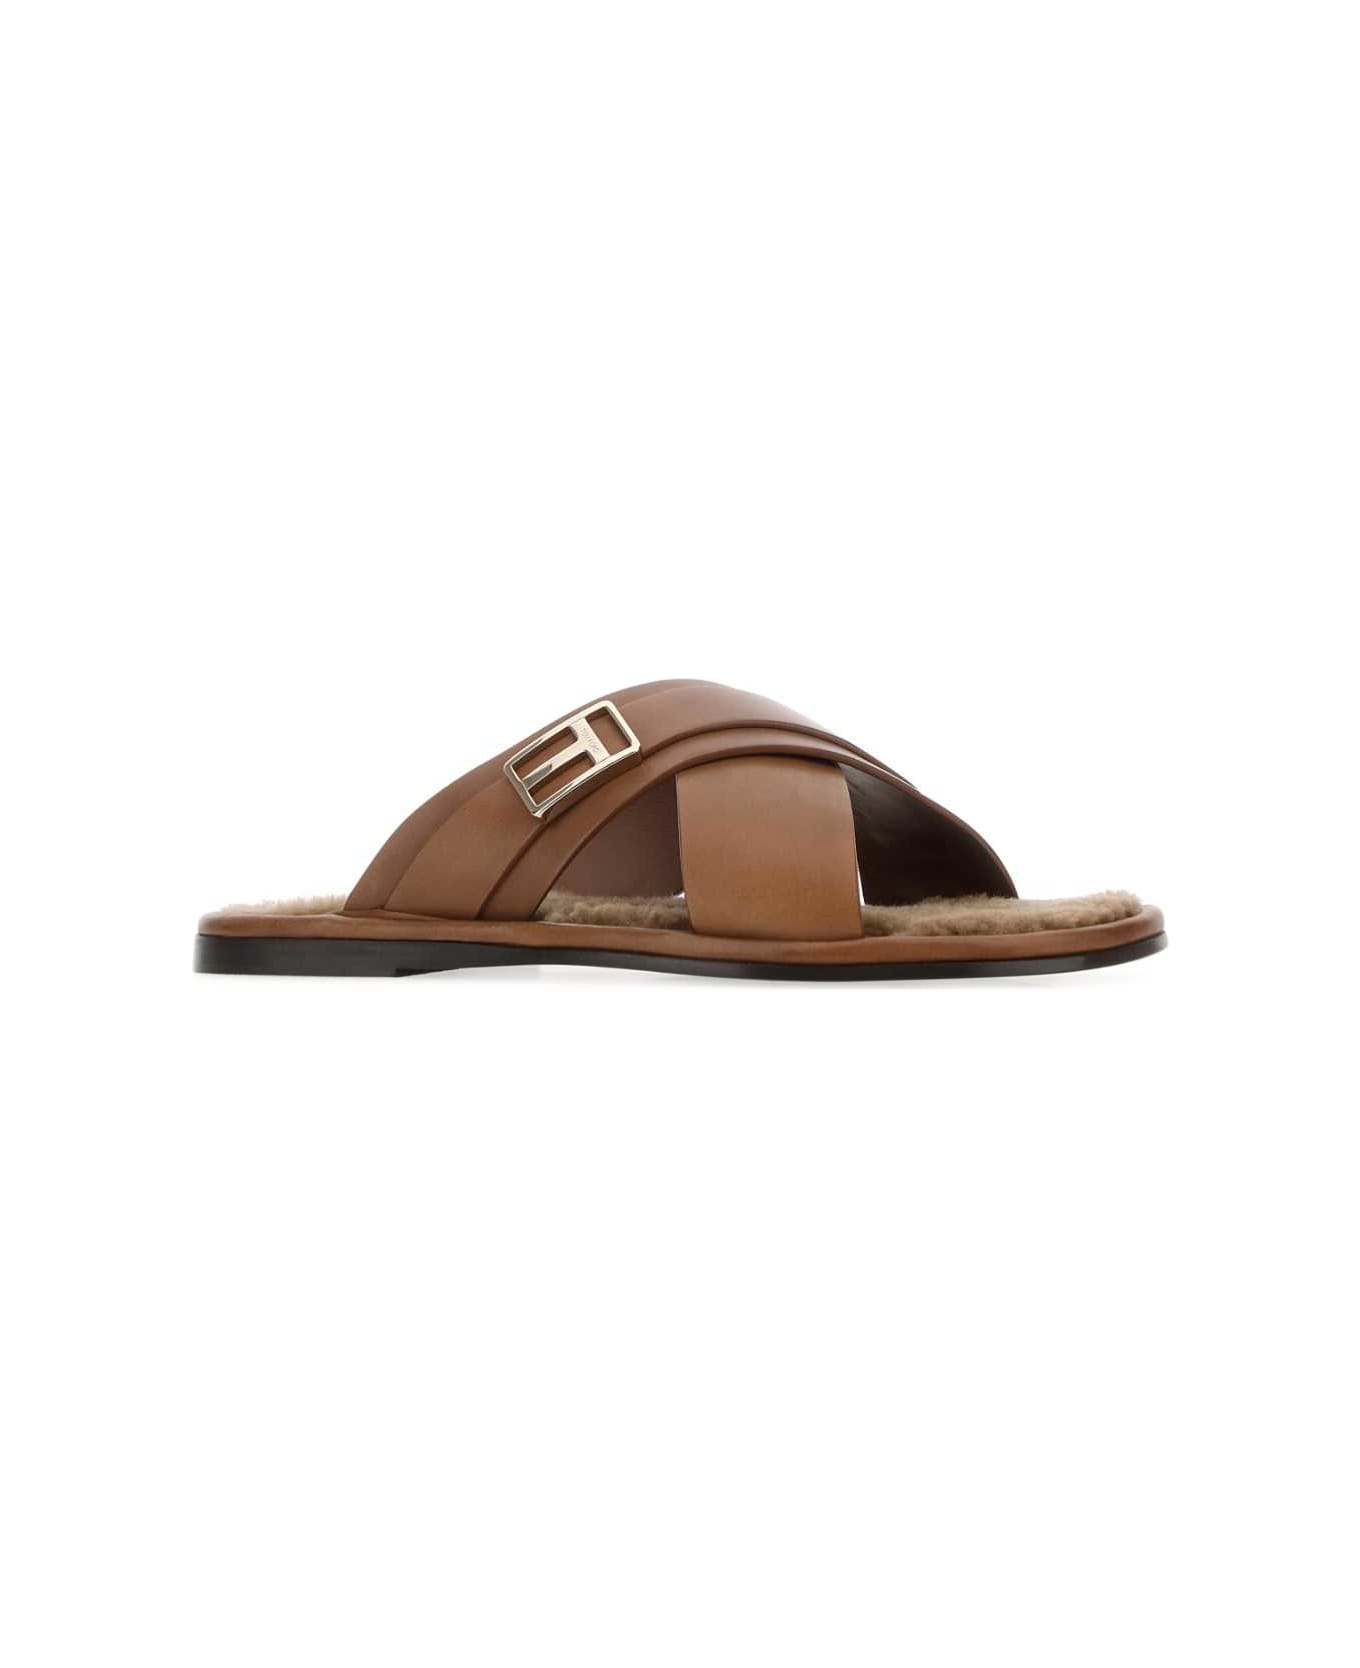 Tom Ford Brown Leather Slippers - 1B031 その他各種シューズ